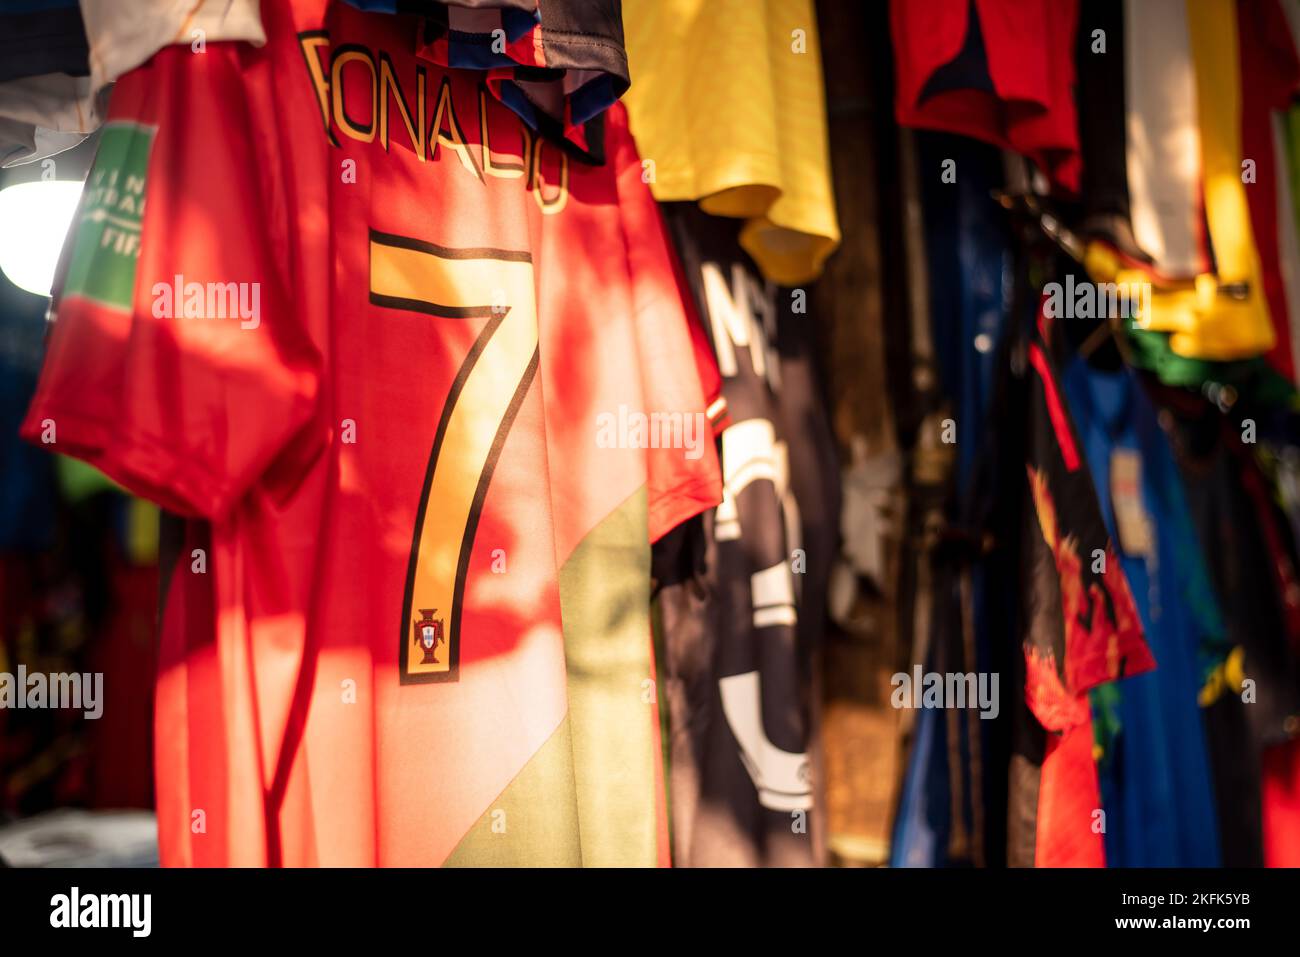 Calcutta, India - November 15, 2022. Soccer jersey of Cristiano Ronaldo number 07 is hanging in a retail shop to sell Stock Photo